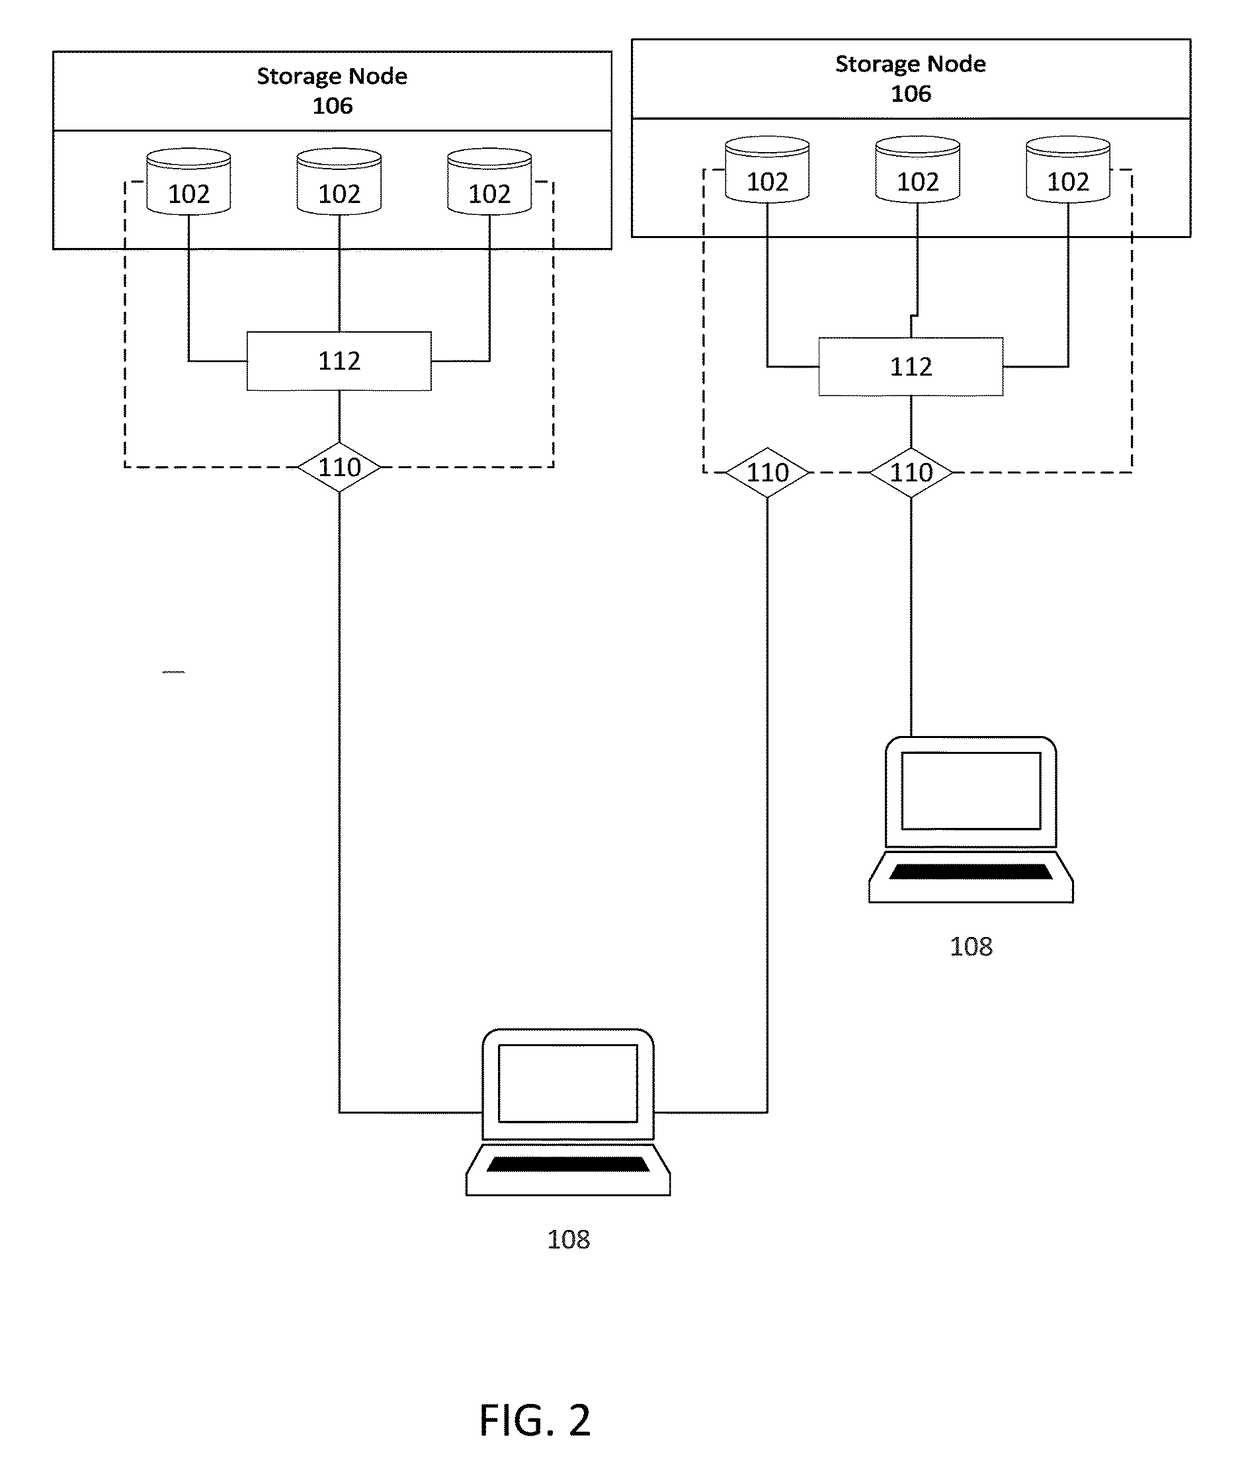 Application Centric Distributed Storage System and Method